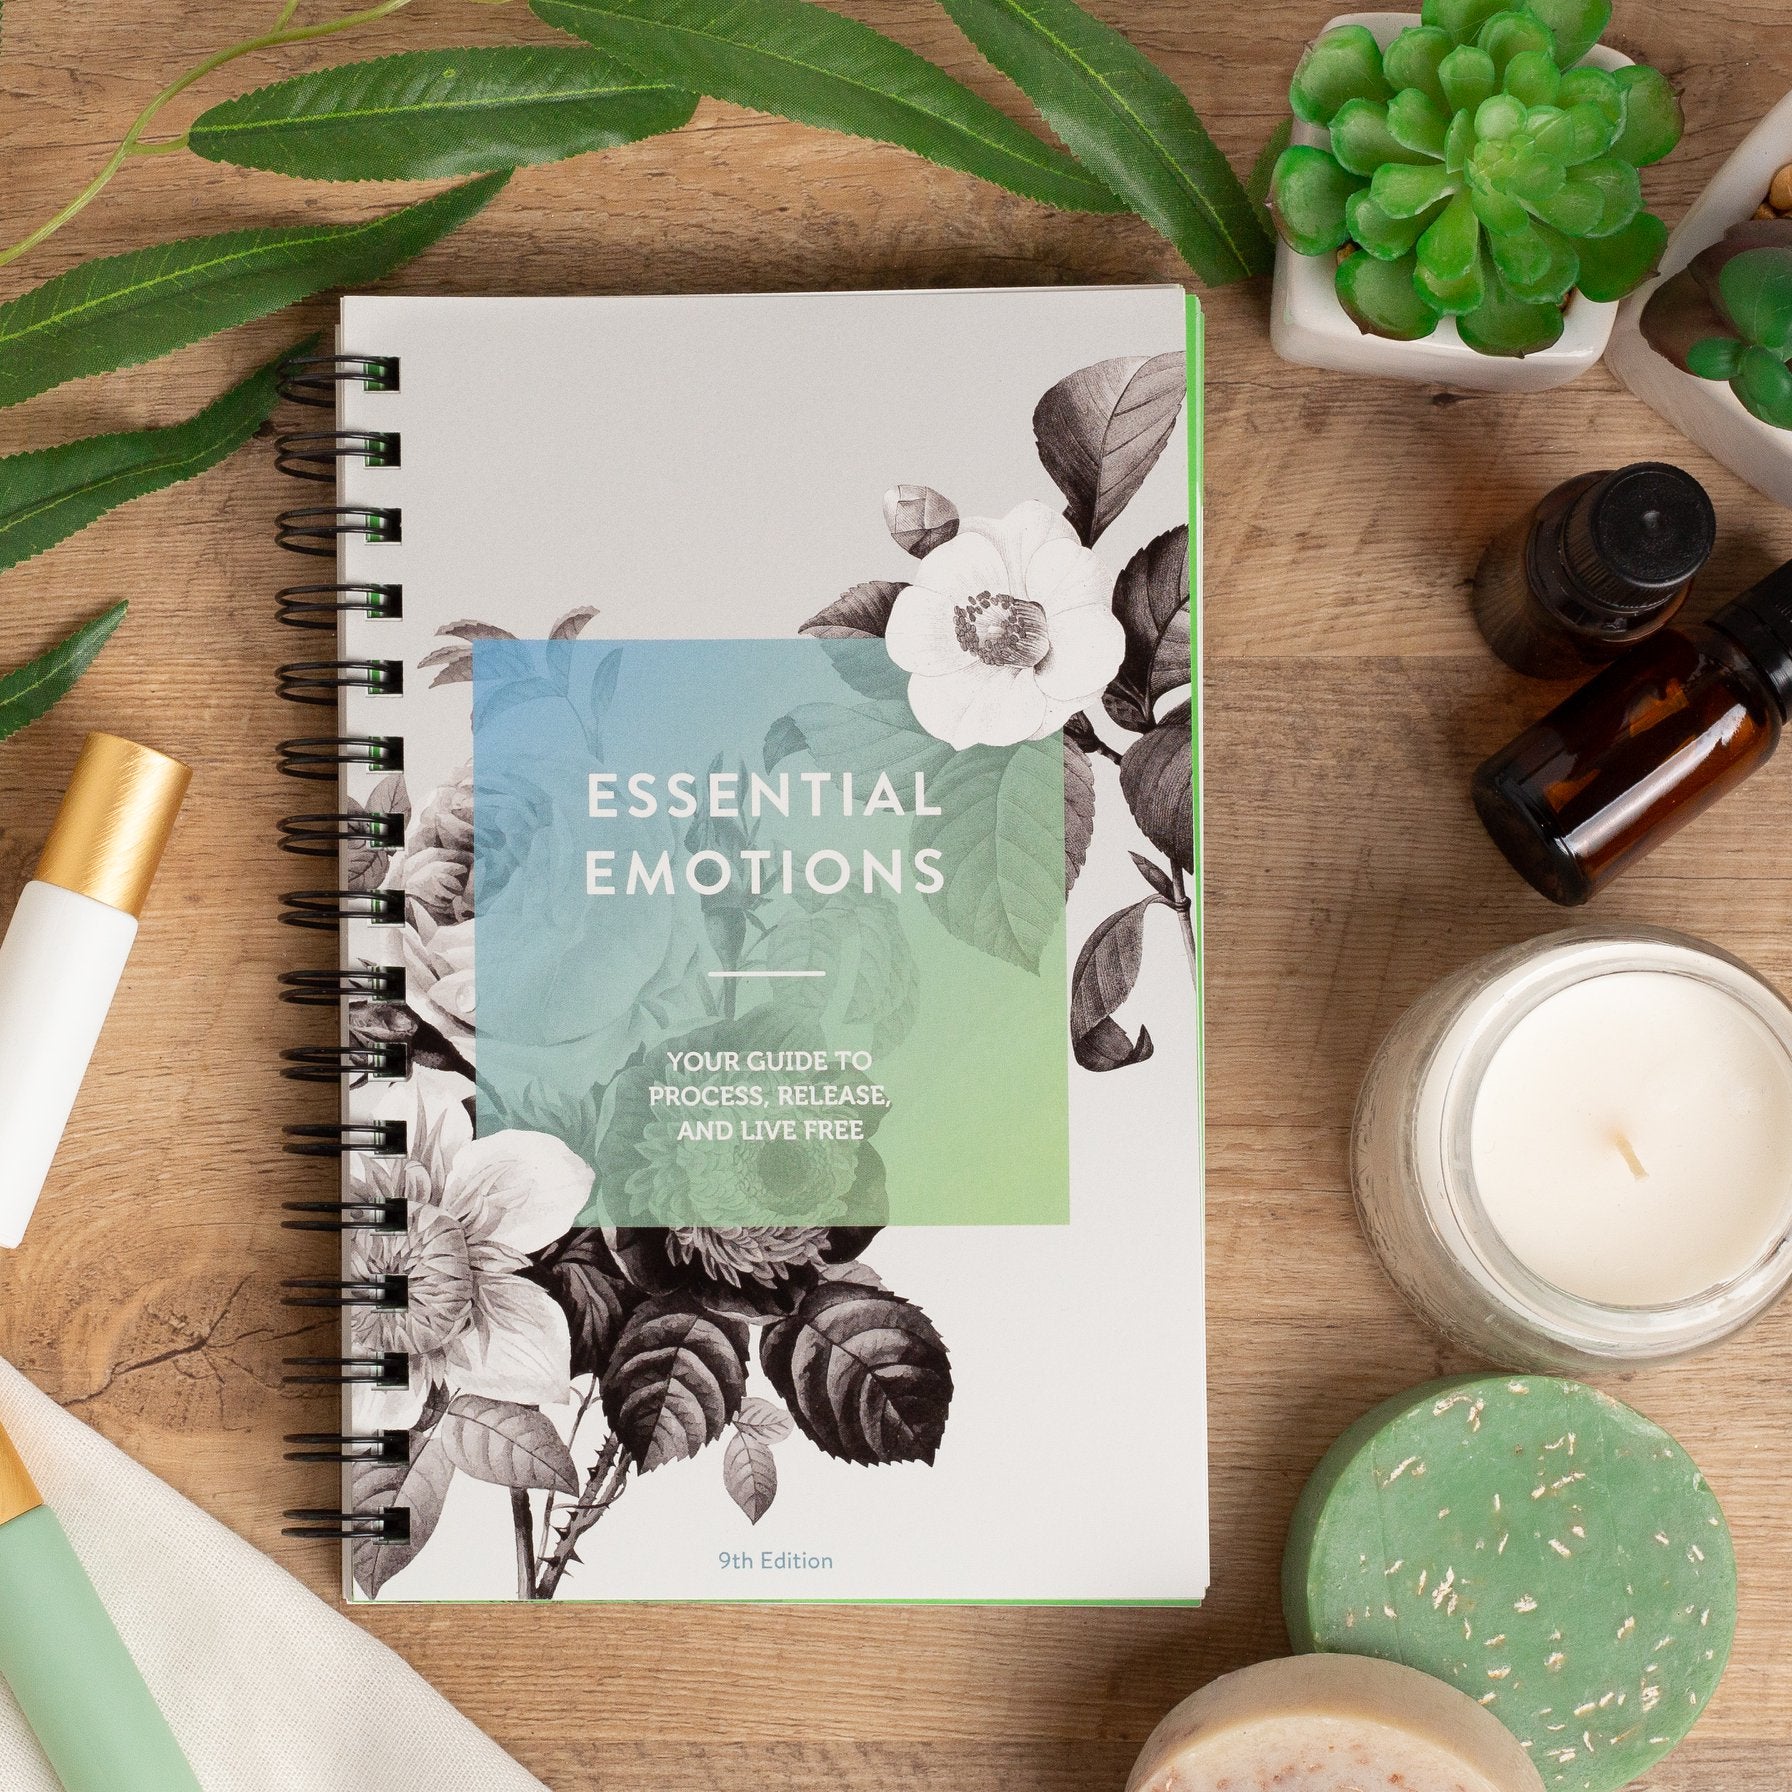 Essential Emotions book laying on a table with essential oil vials, roller bottles, soaps, and plants.